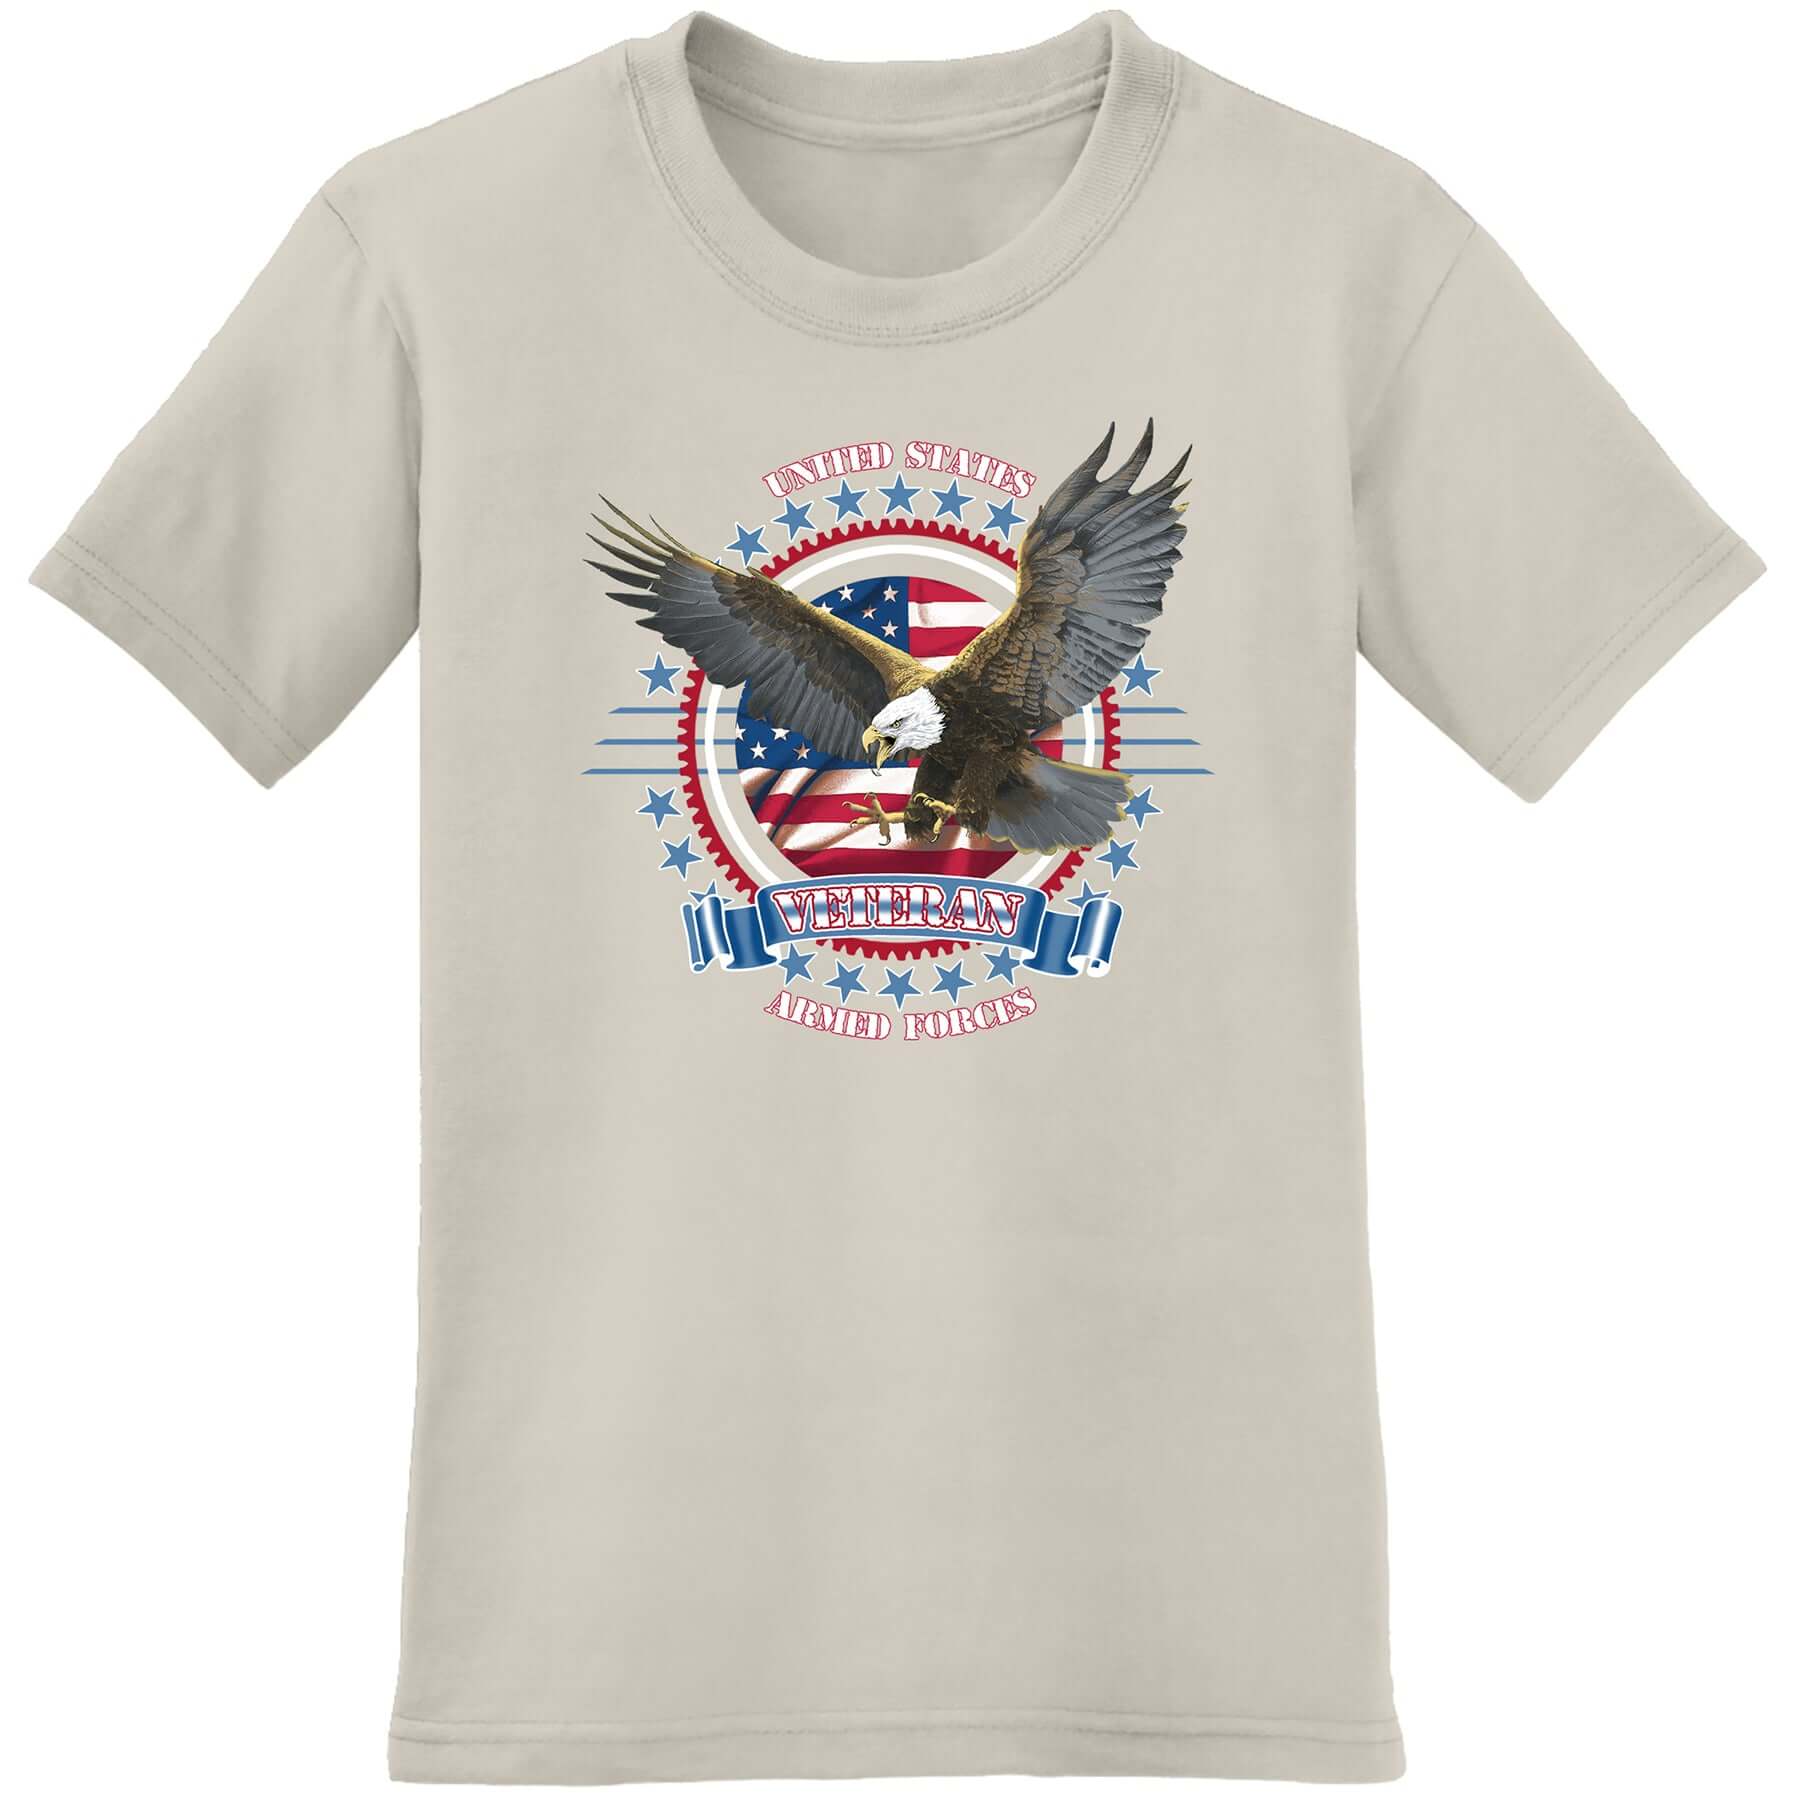 united states armed forces veterans tee - the flag shirt